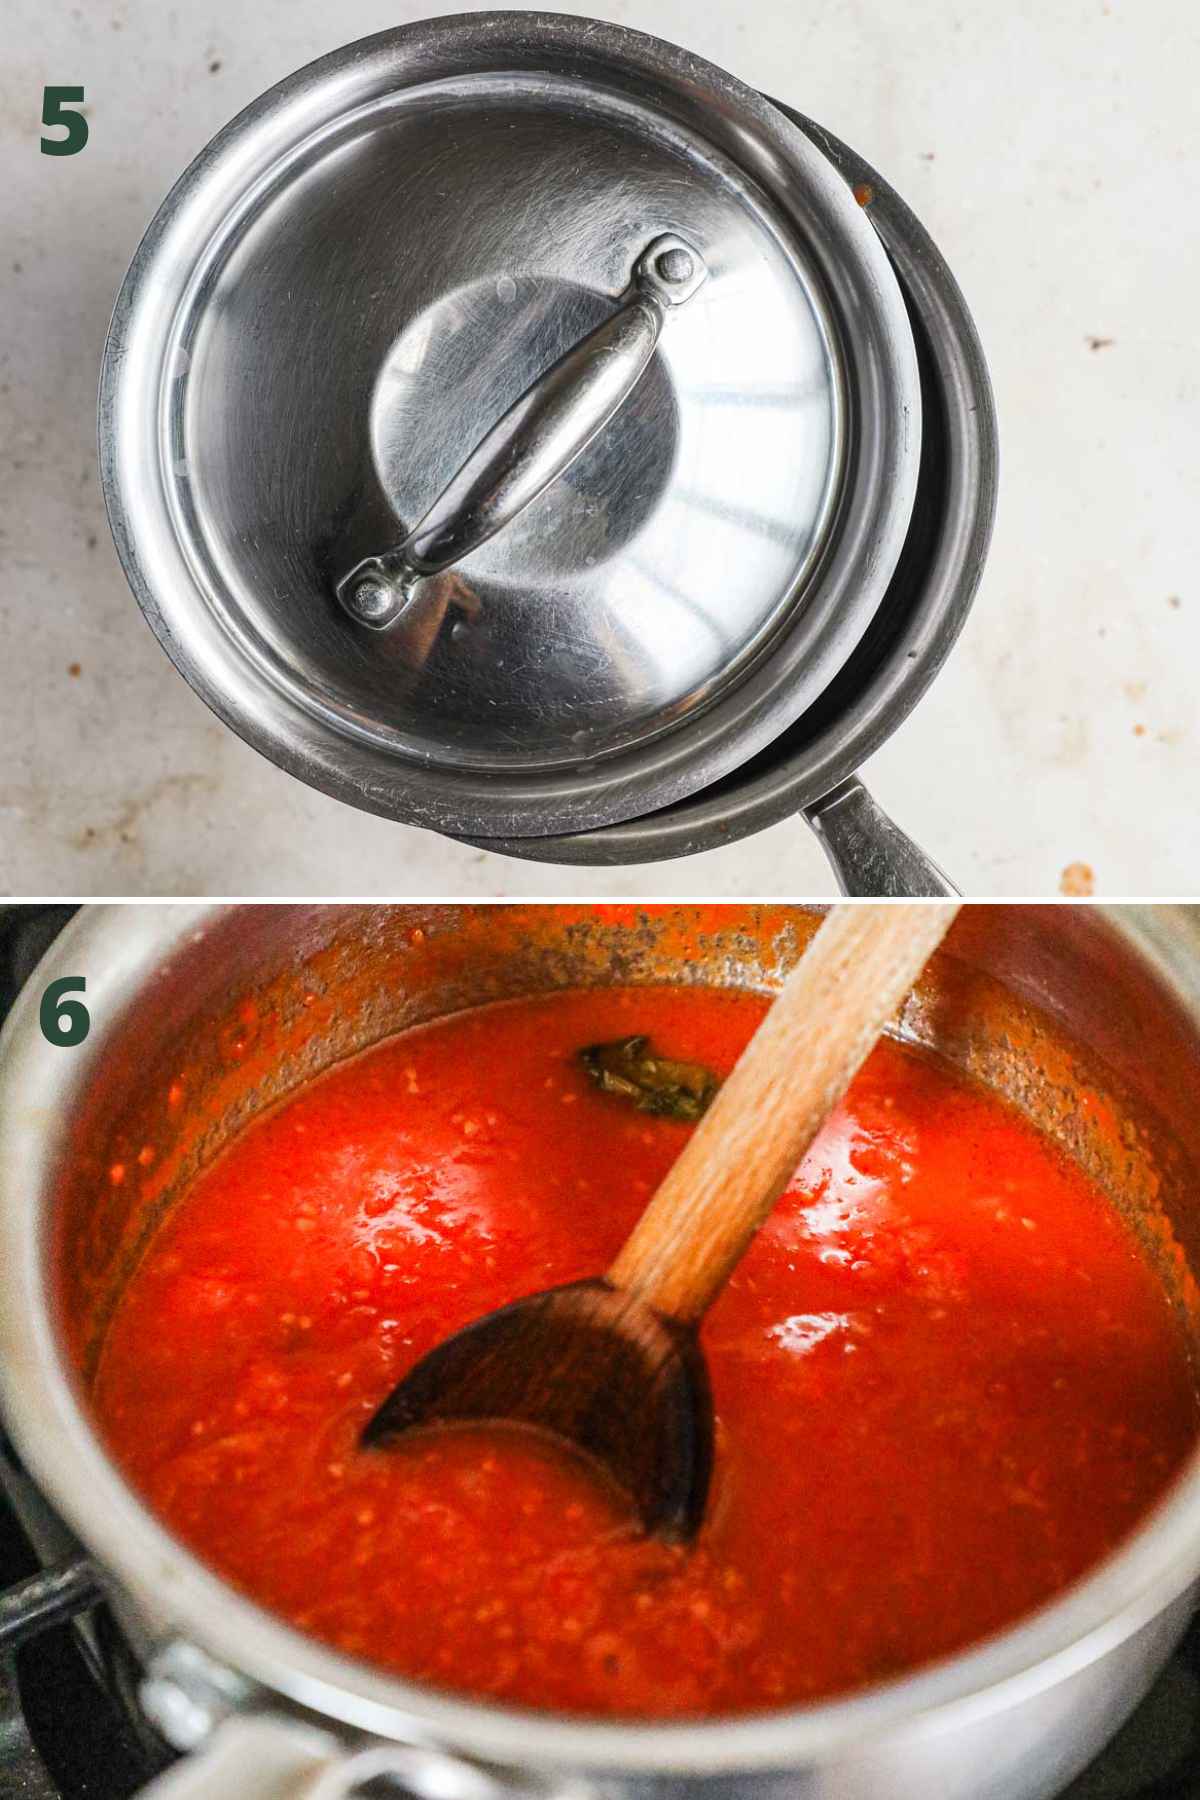 Steps to make authentic pomodoro sauce (sugo di pomodoro), simmer in the pot with the lid ajar, then stir and use for pasta, pizza, lasagna, eggplant parmigiana, and more.